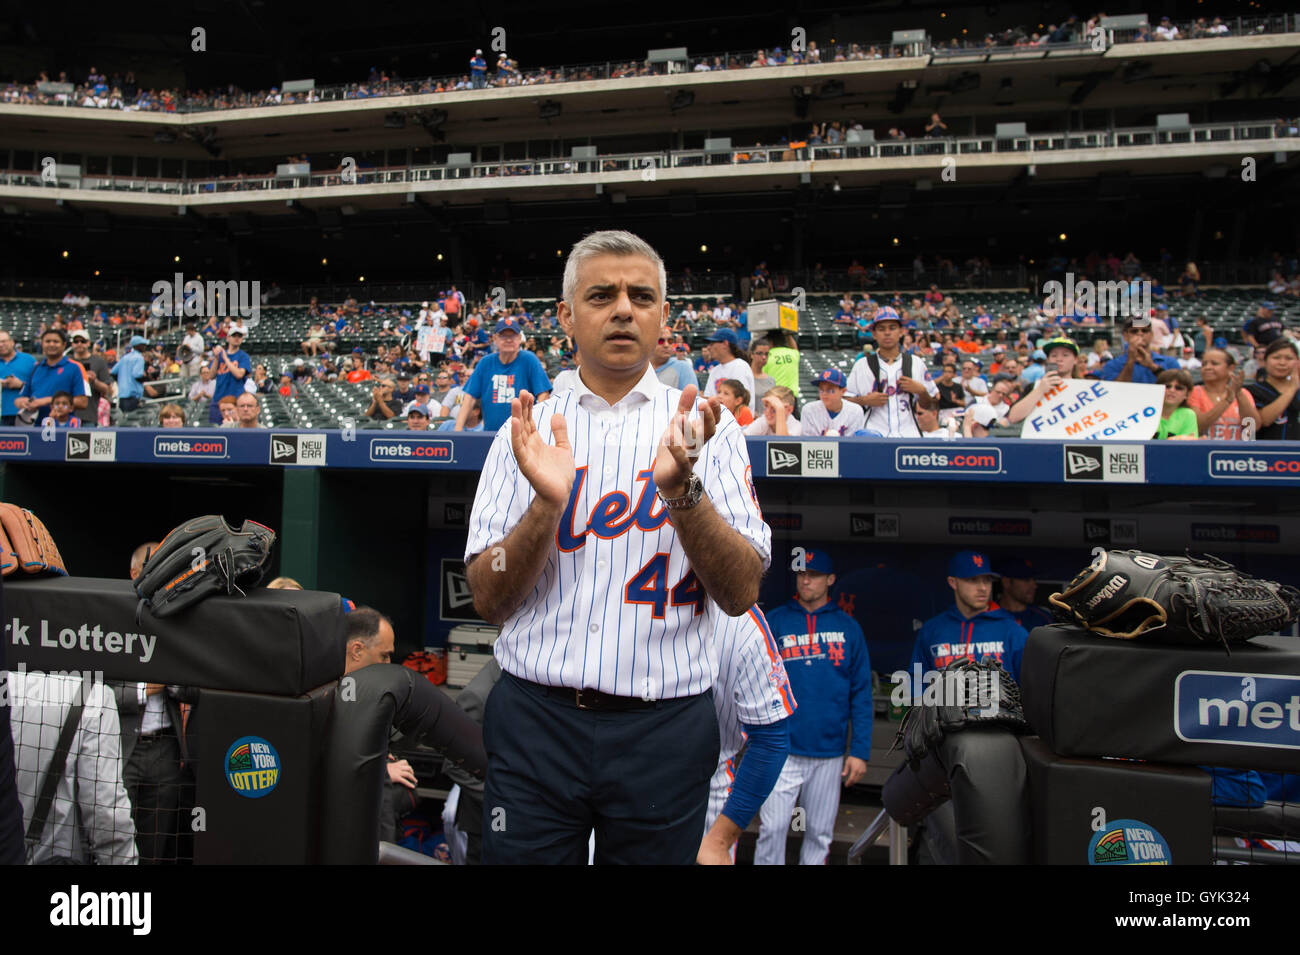 Mayor of London Sadiq Khan wears a shirt with his name on as he arrives to pitch the first ball at a baseball game between the New York Mets and Minnesota Twins at Citi Field in New York City (NYC) during a three day visit to the US capital as part of his visit to North America. Stock Photo